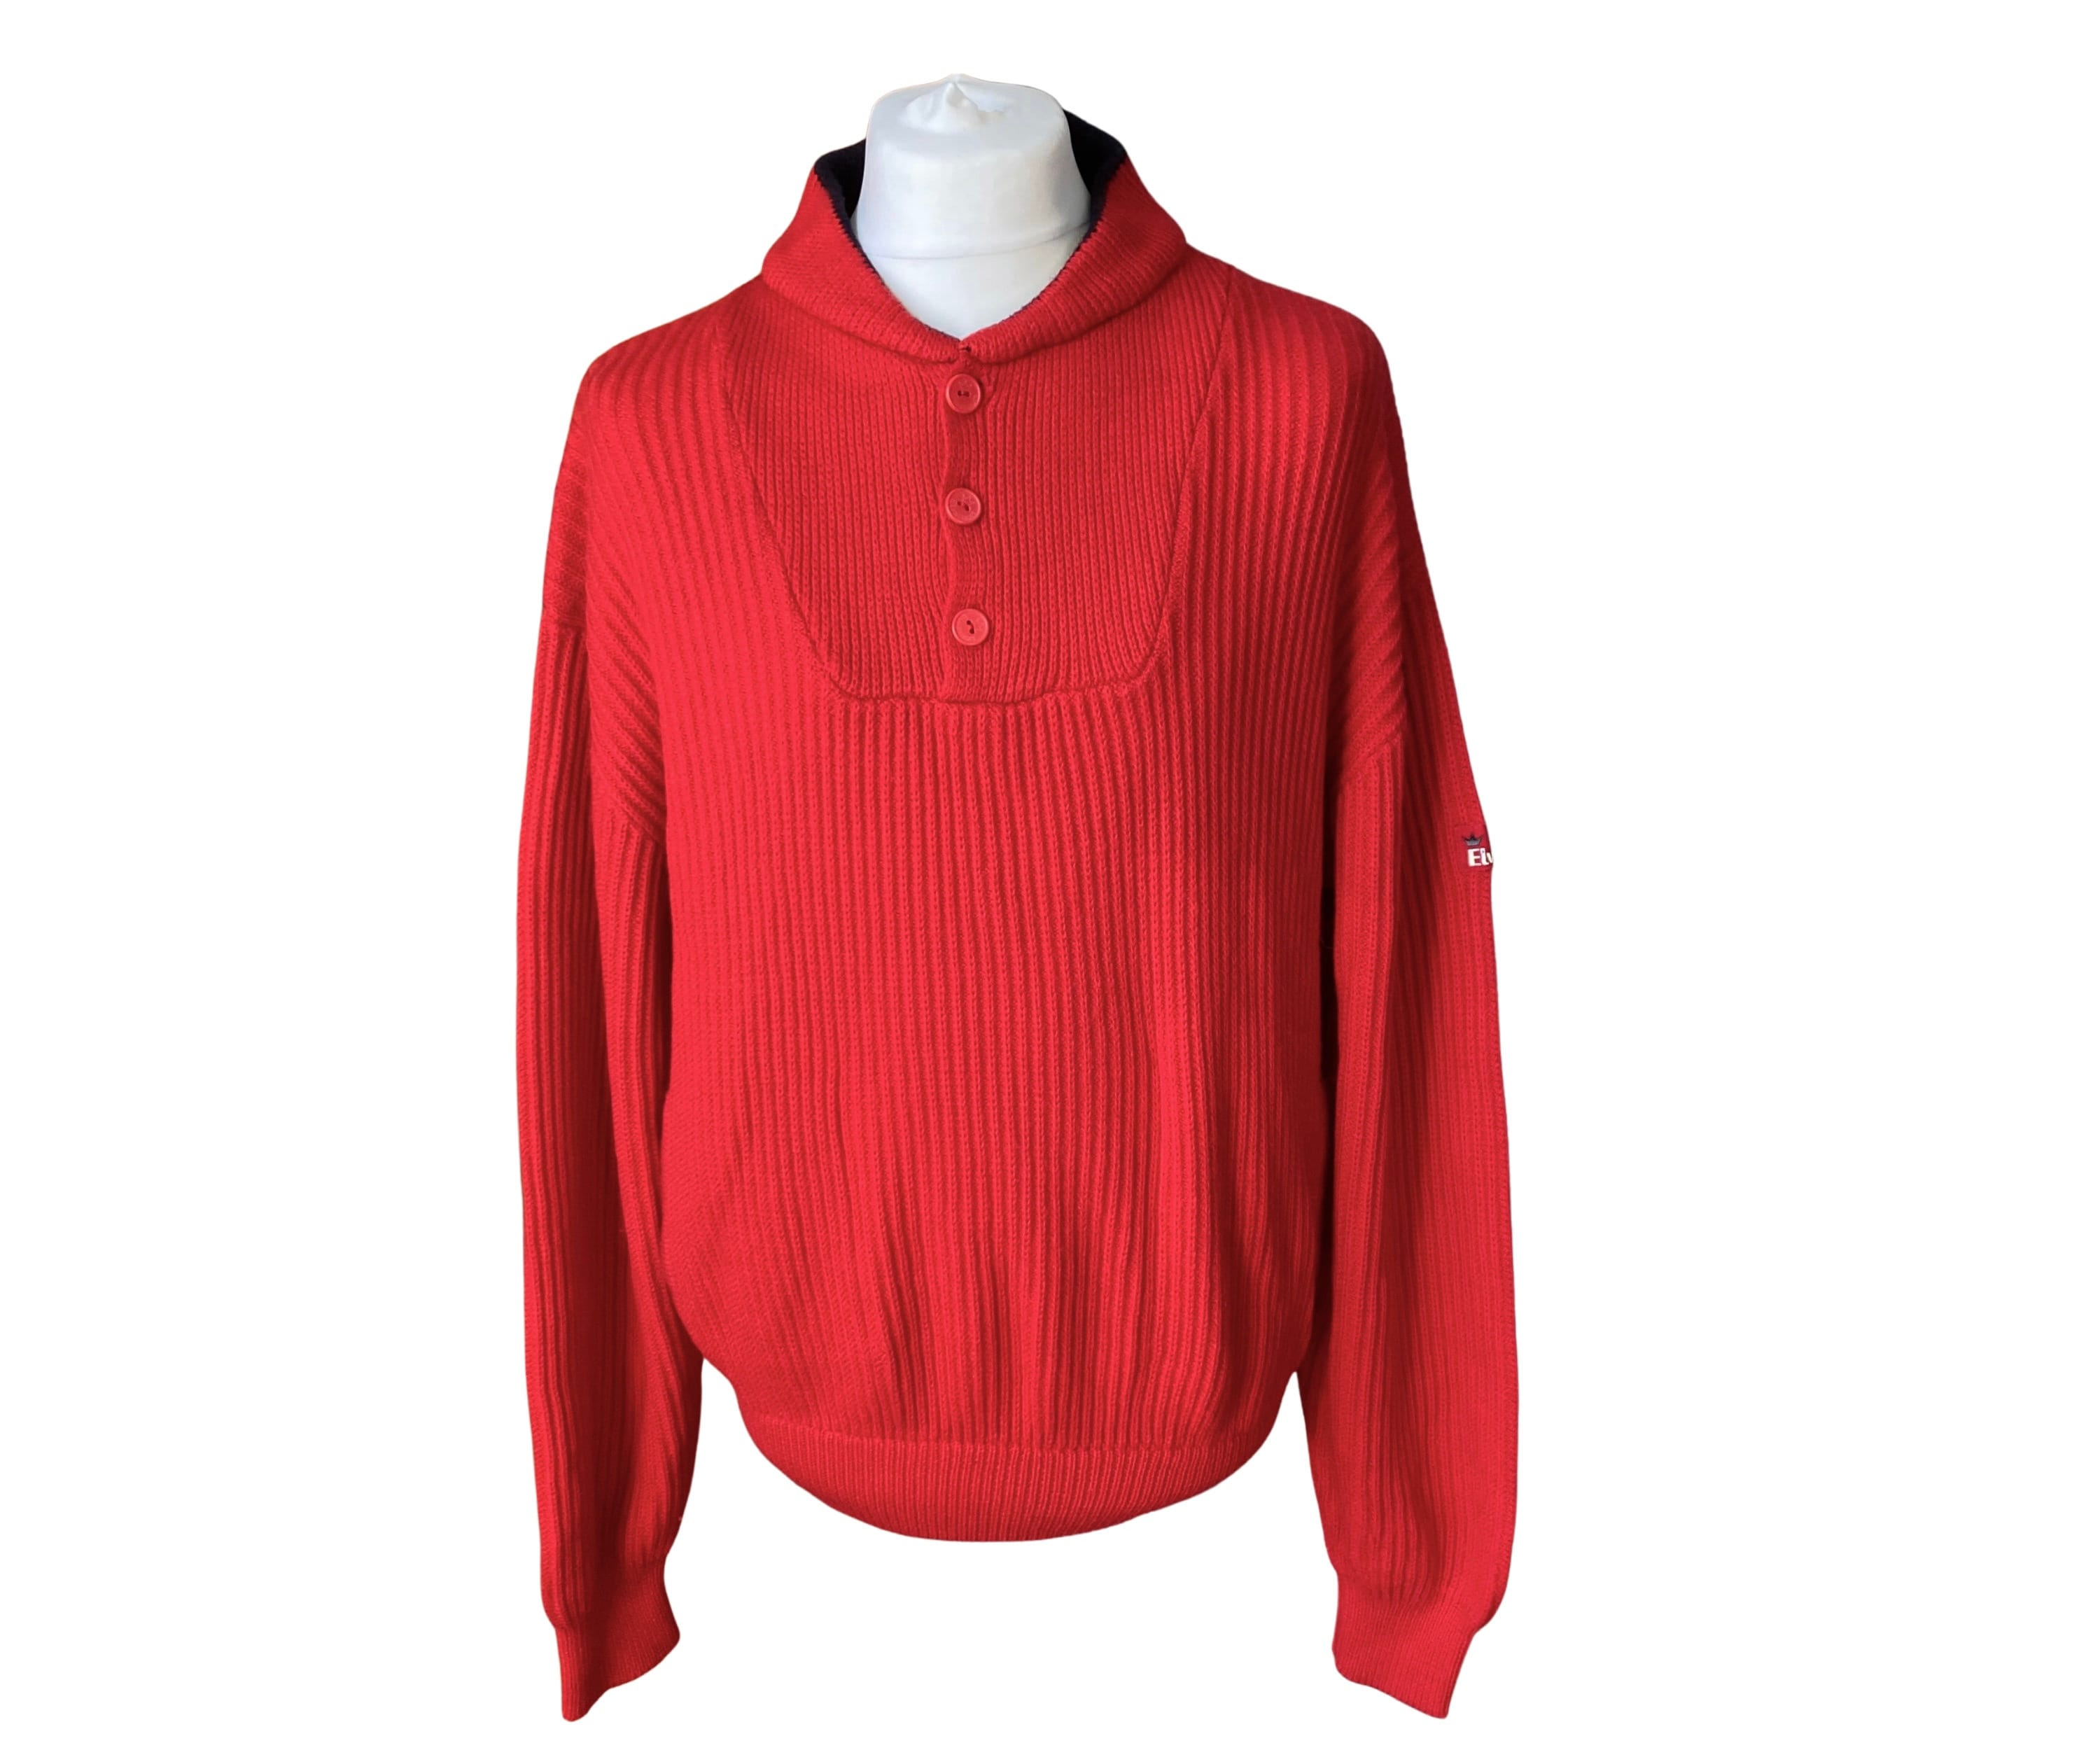 Vintage red ribbed chunky knit sailing jumper. UK size men's XXL ...